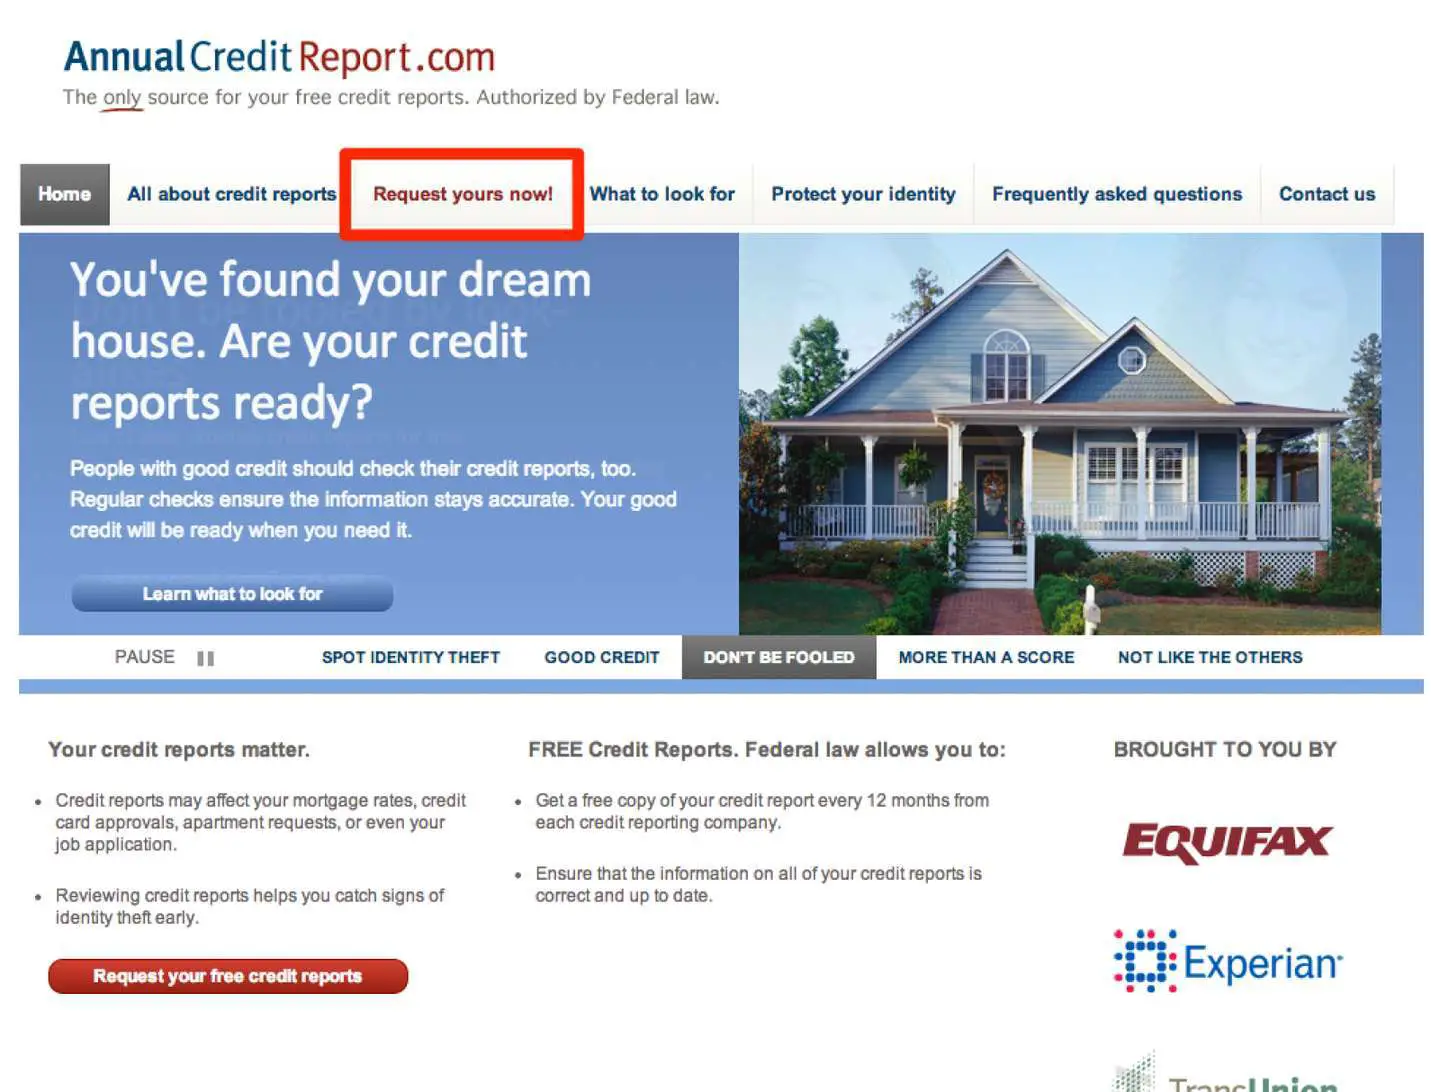 How to Get a Free Annual Credit Report from the Government